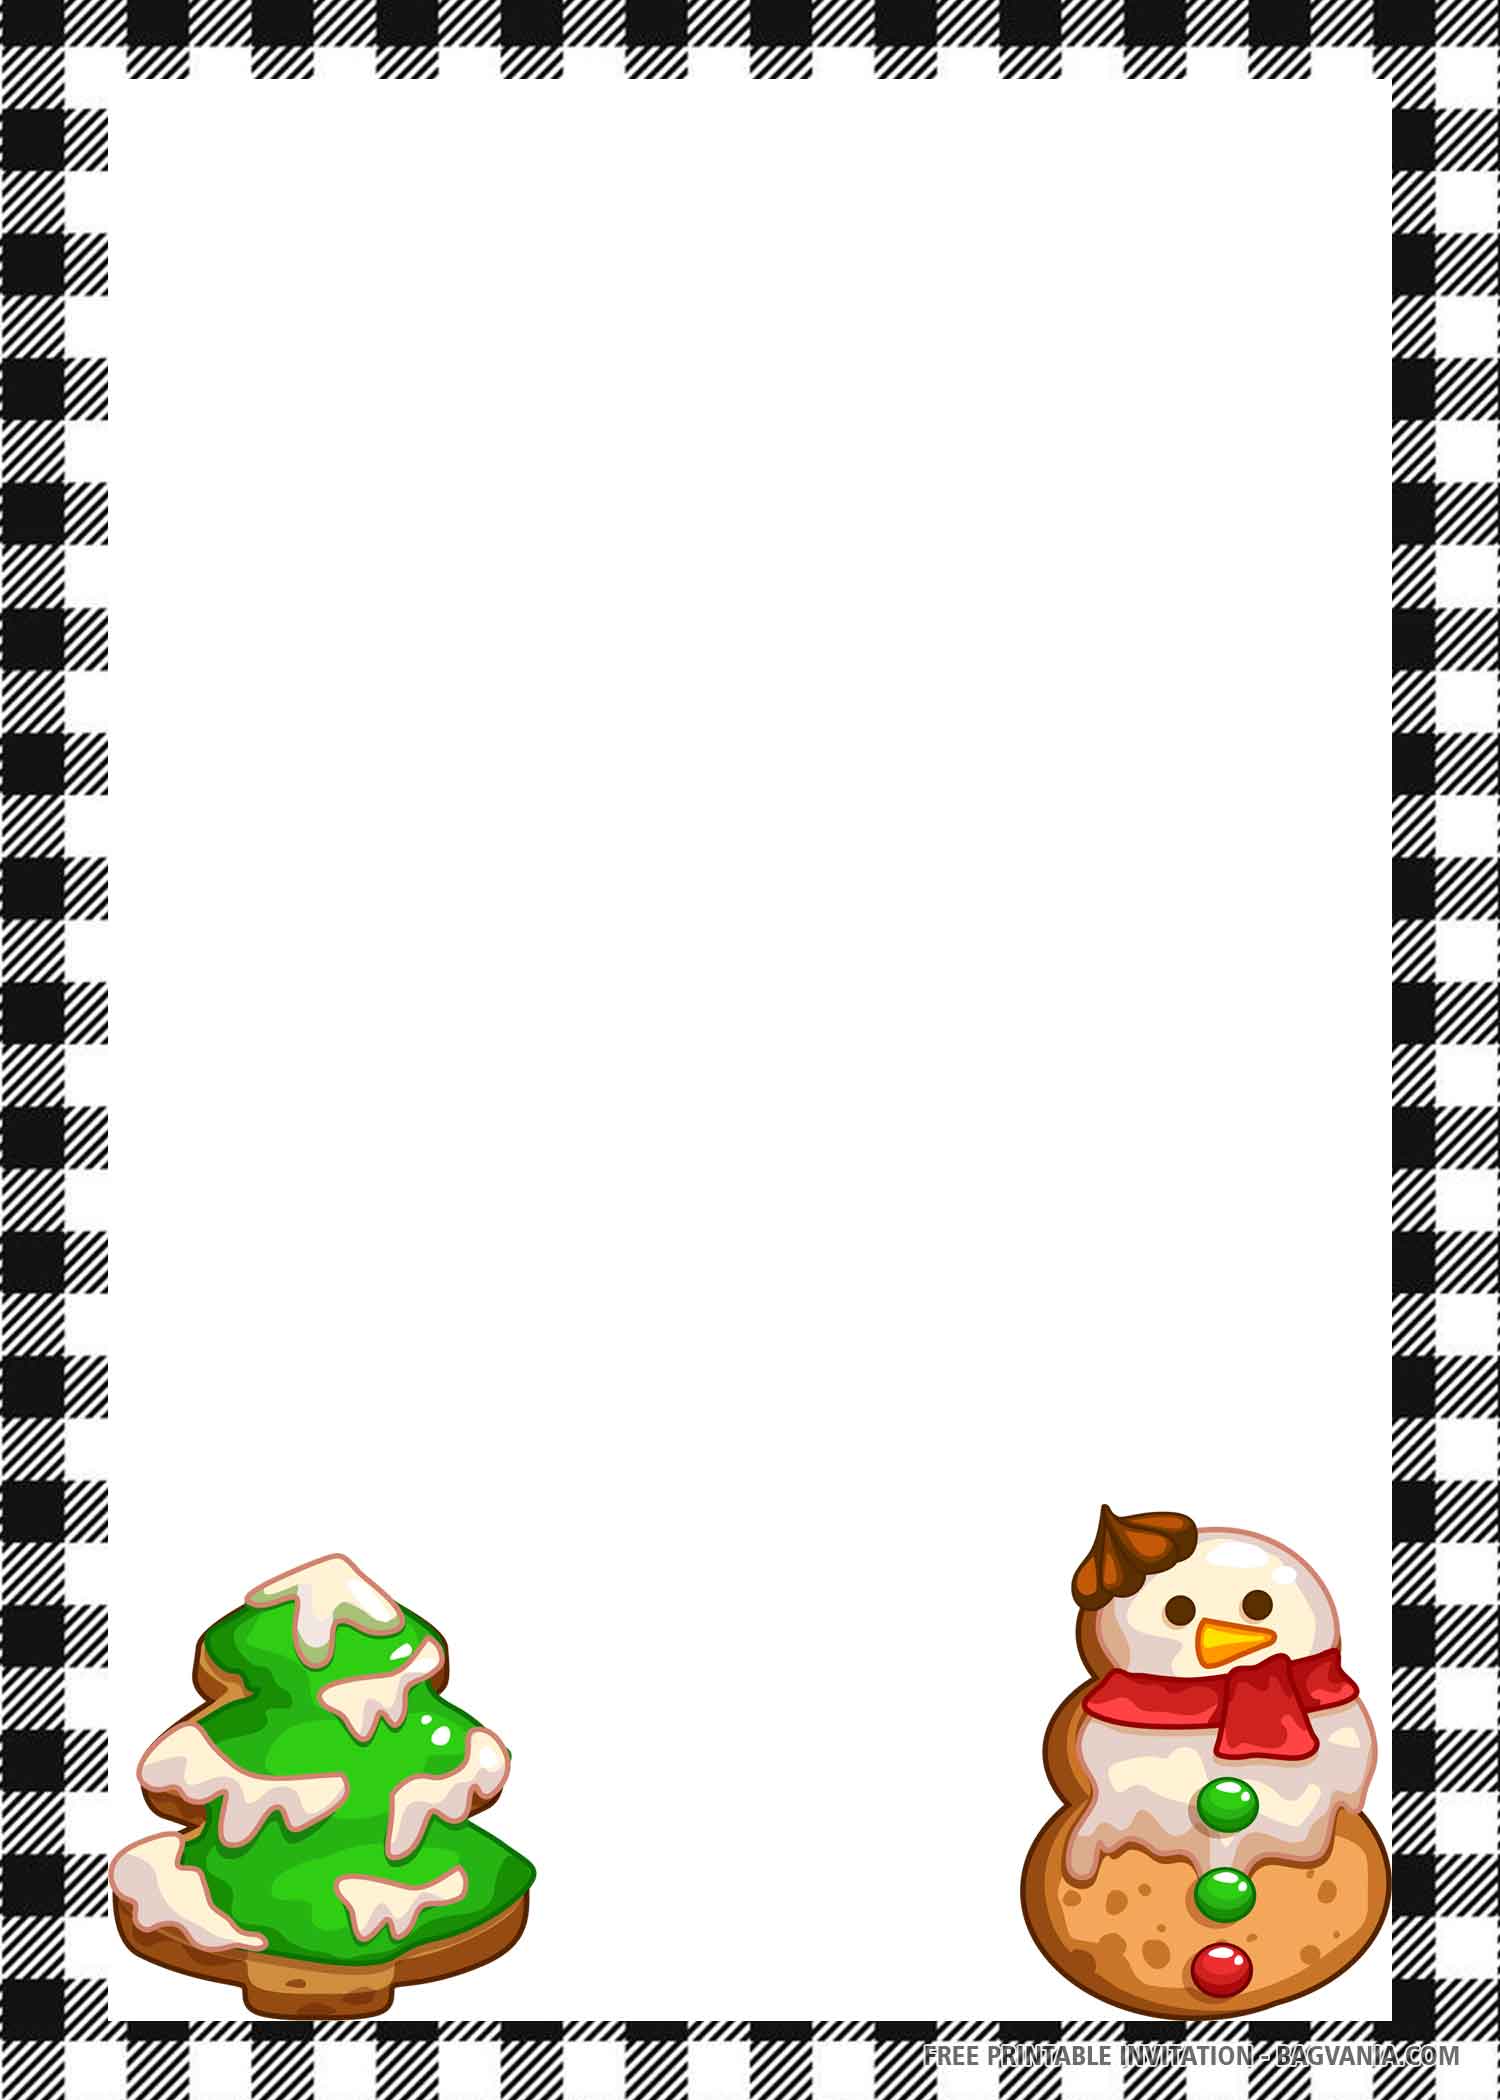 FREE Christmas Cookies with Pine Tree and Snowman